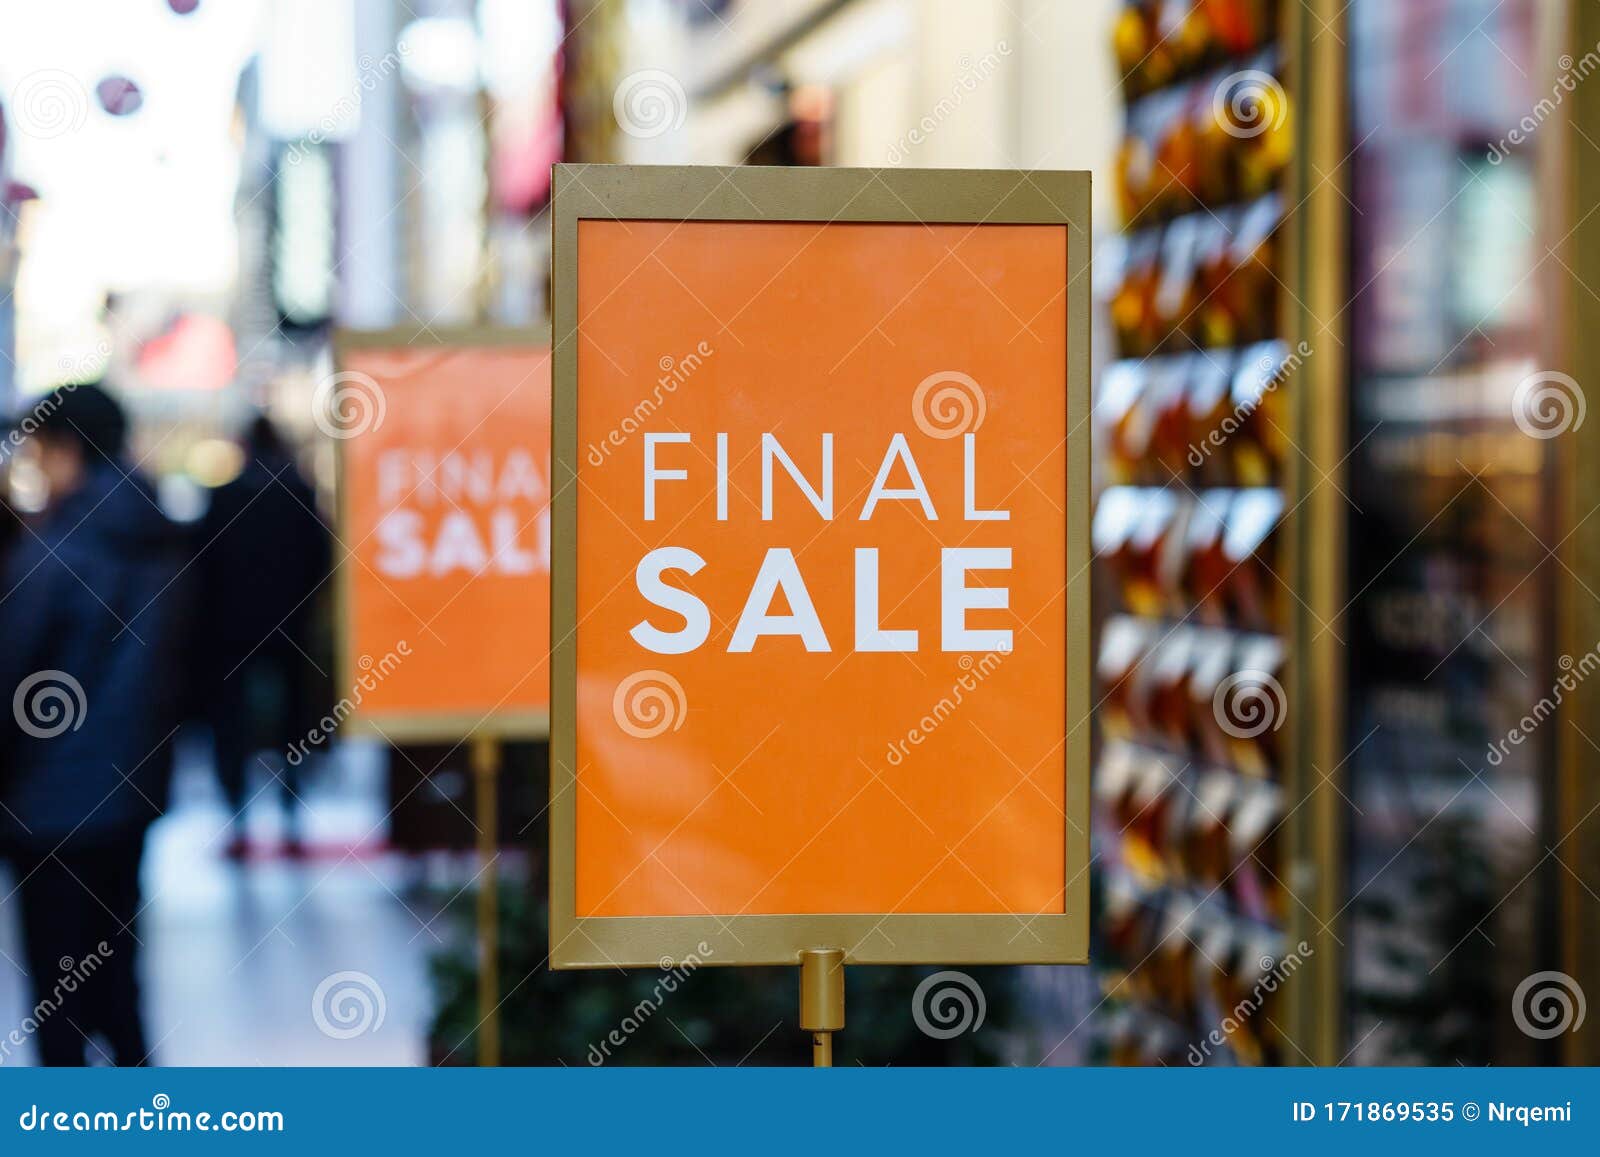 Premium Photo  Clothes on the rail and a sale sign final sale discounts